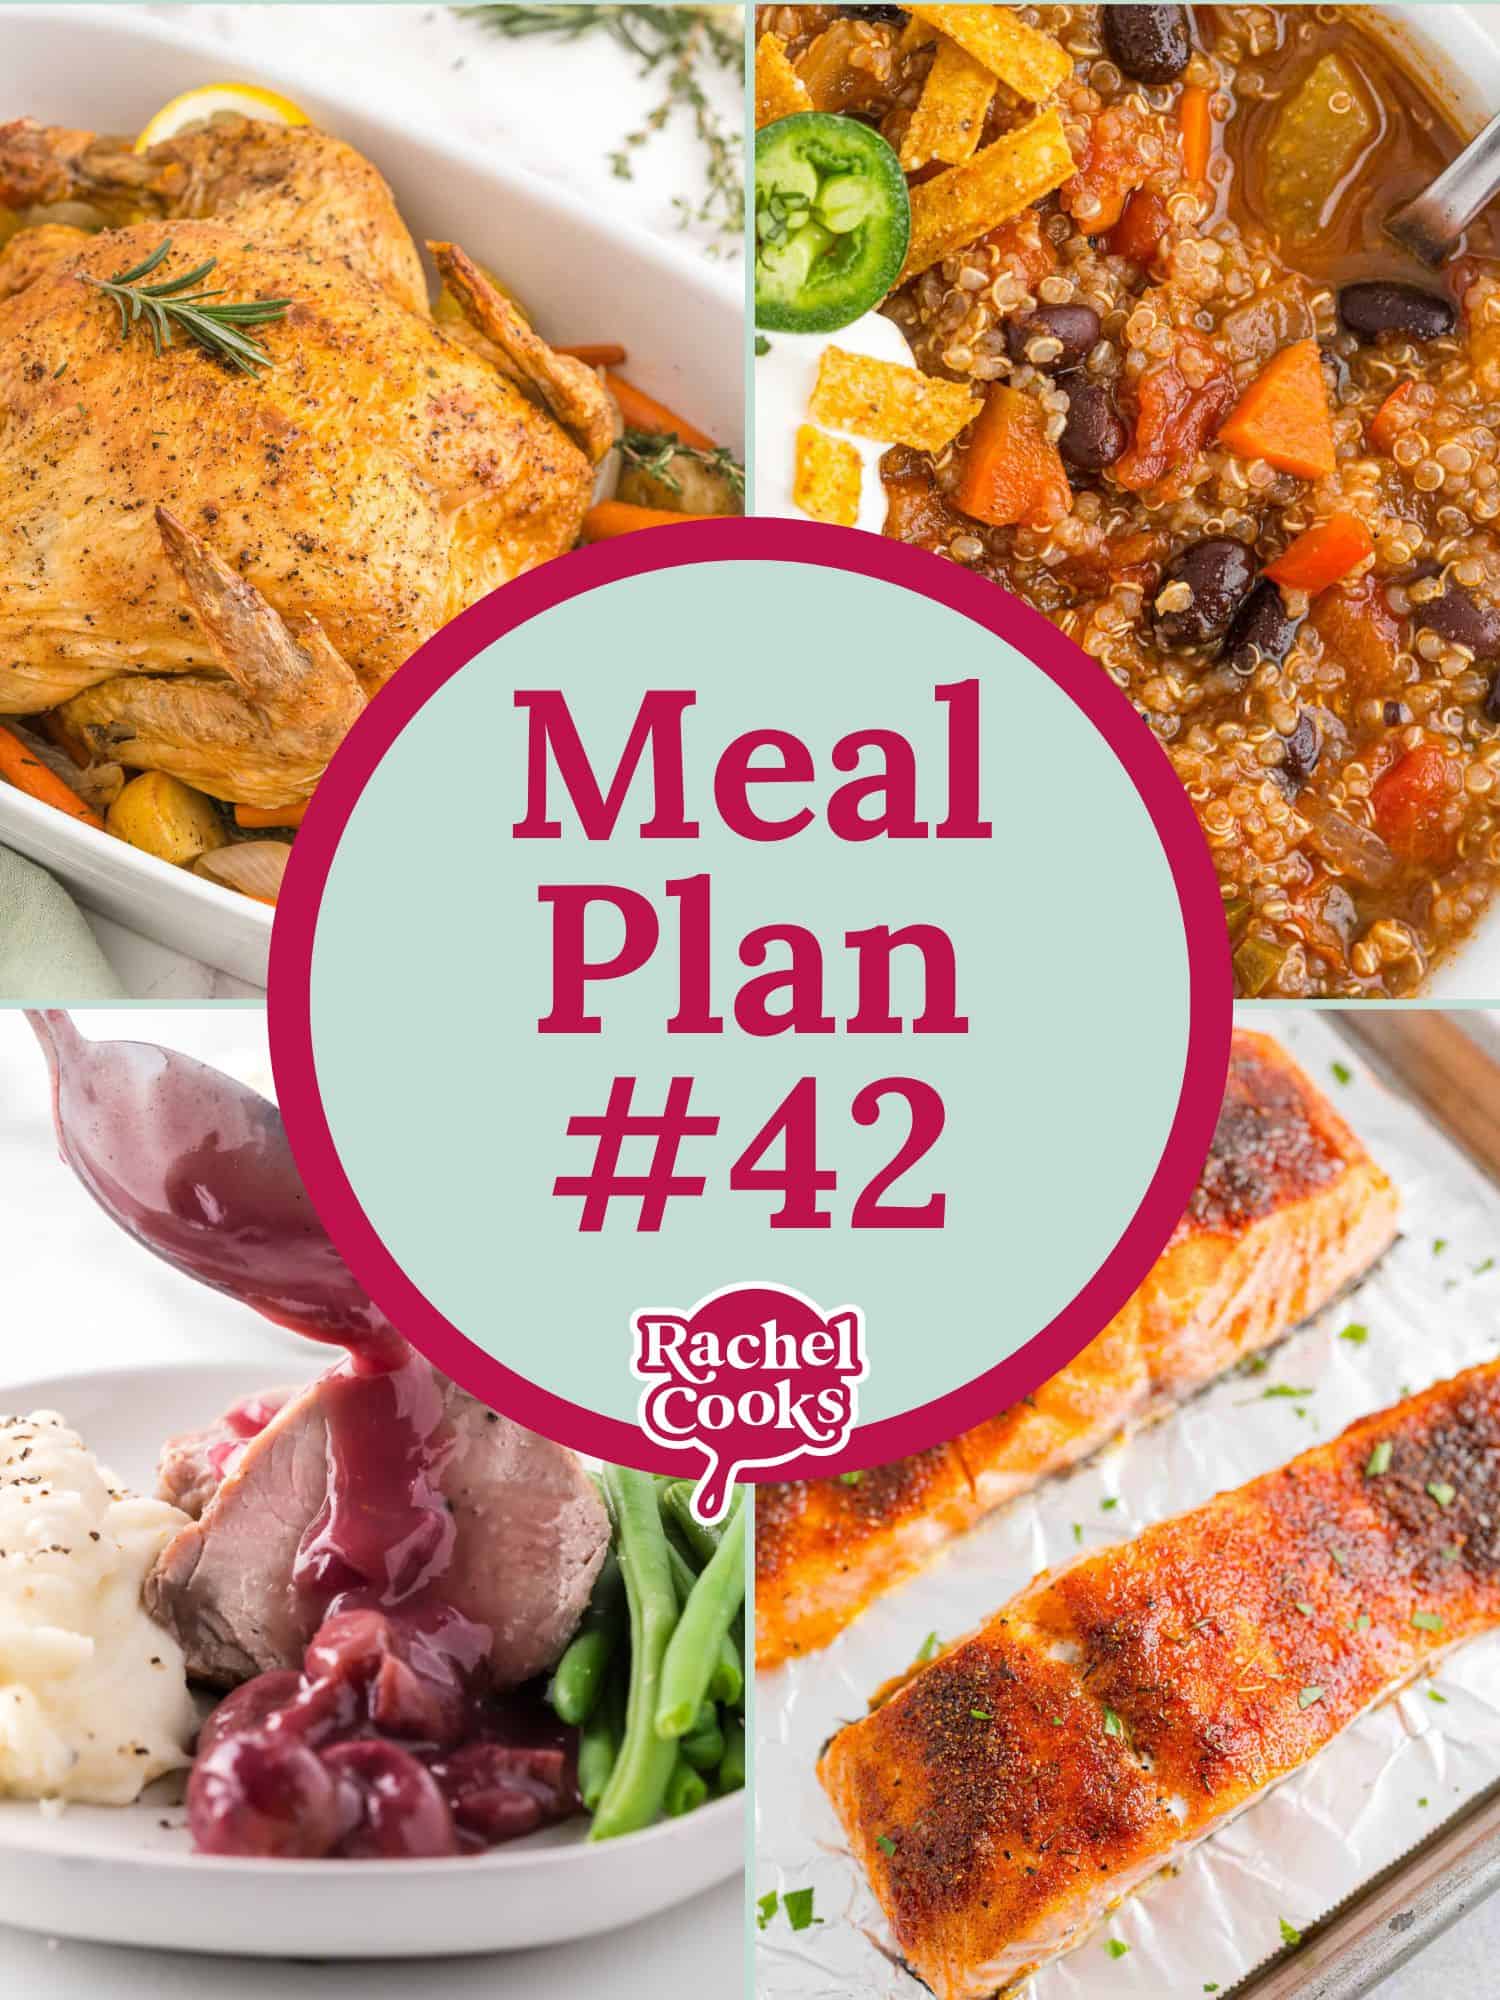 Meal plan 42 preview image with text and photos.